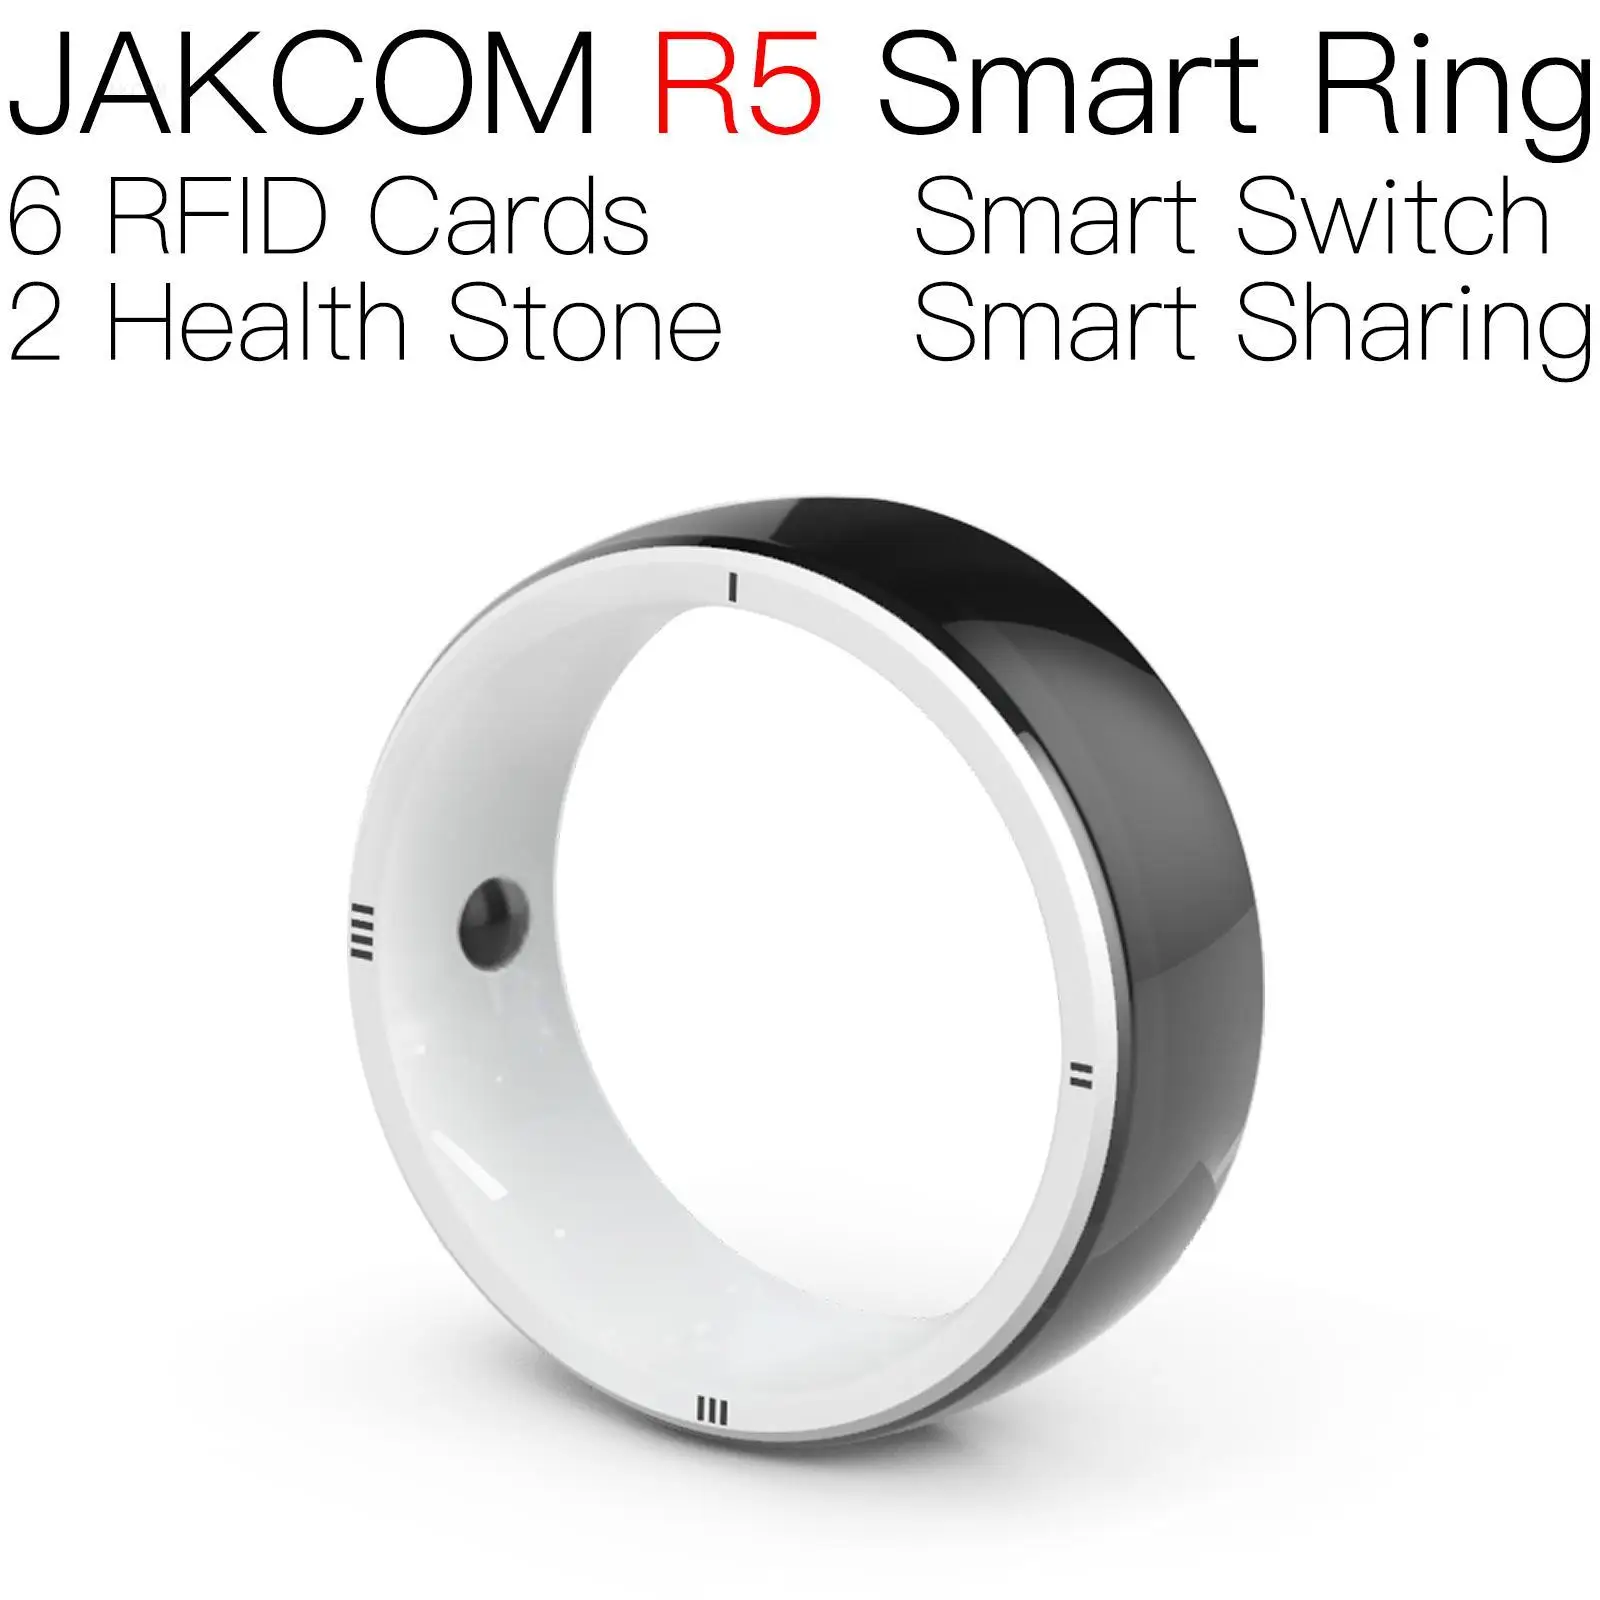 

JAKCOM R5 Smart Ring Best gift with n tag 216 rfid dual tags iso 14443 a reader chip universal g1010 pvc id card printer